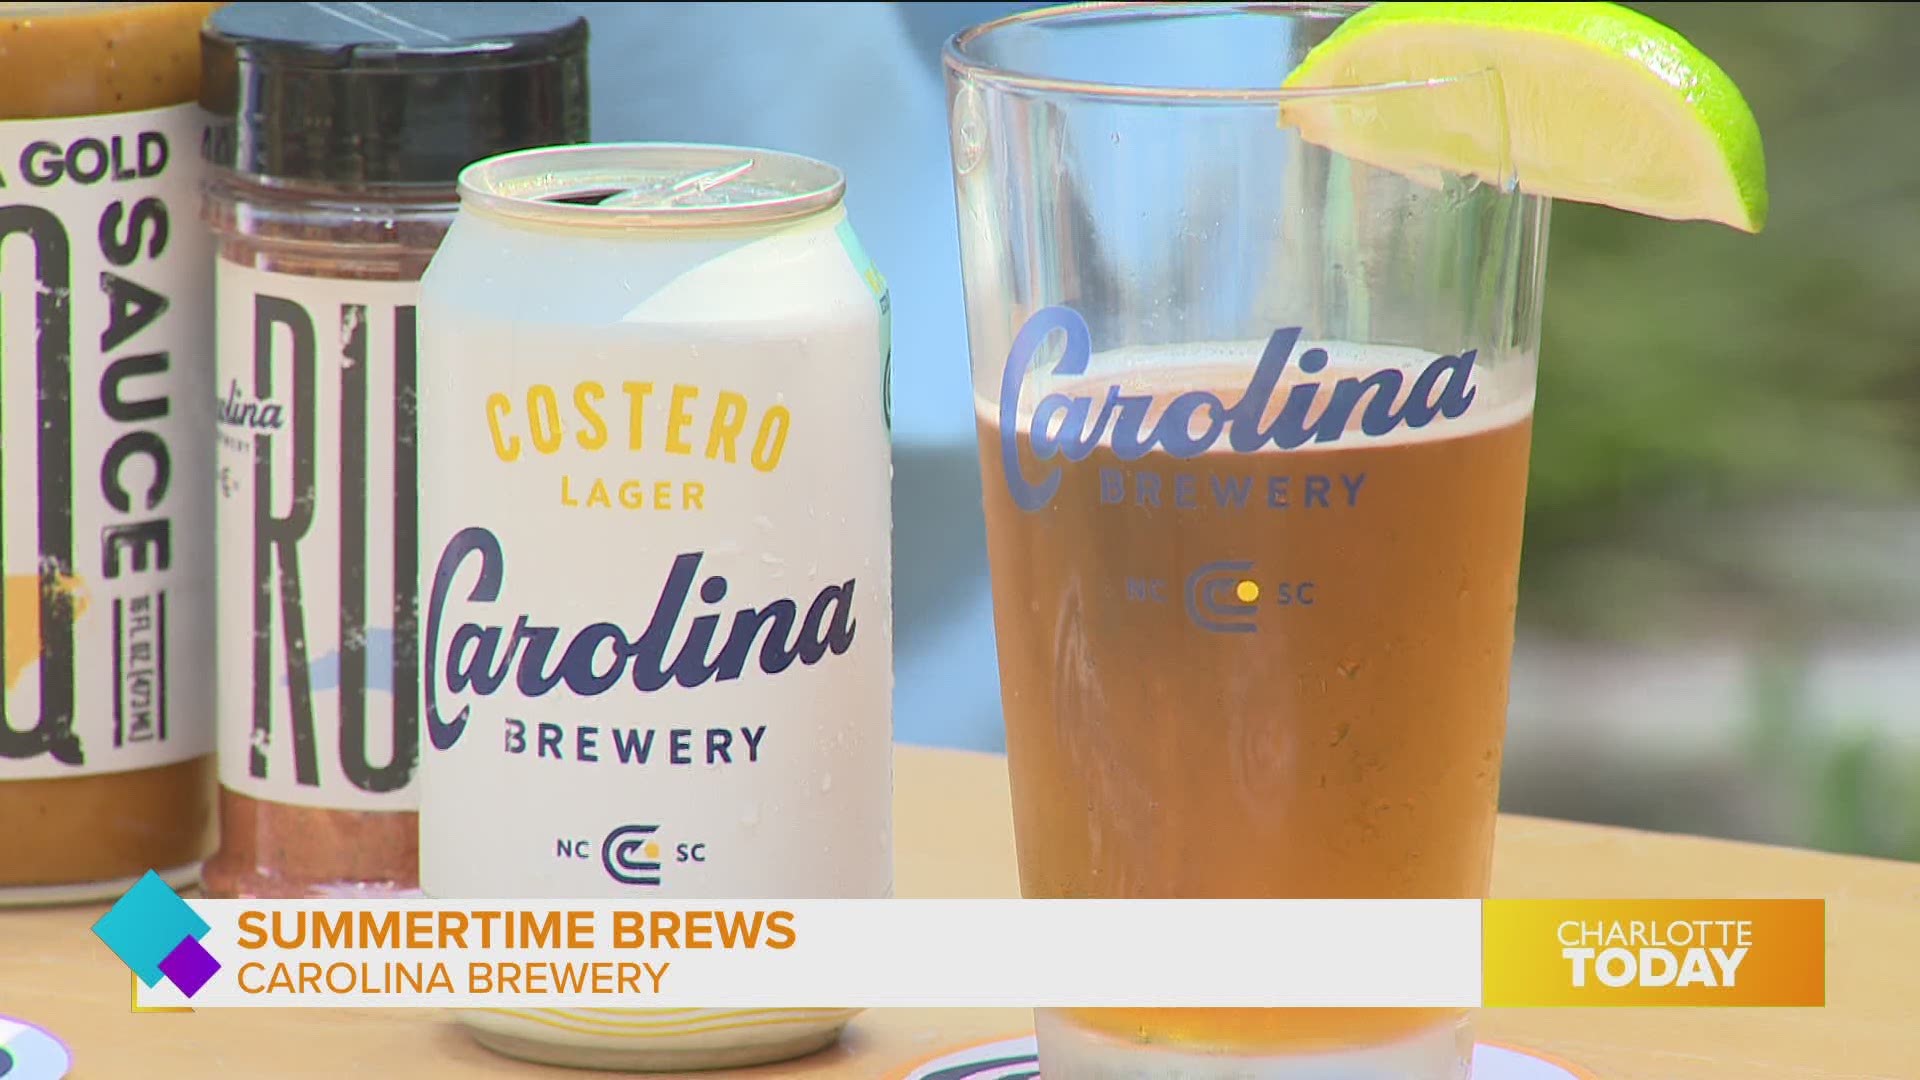 Carolina Brewery has so many beers perfect for the summertime